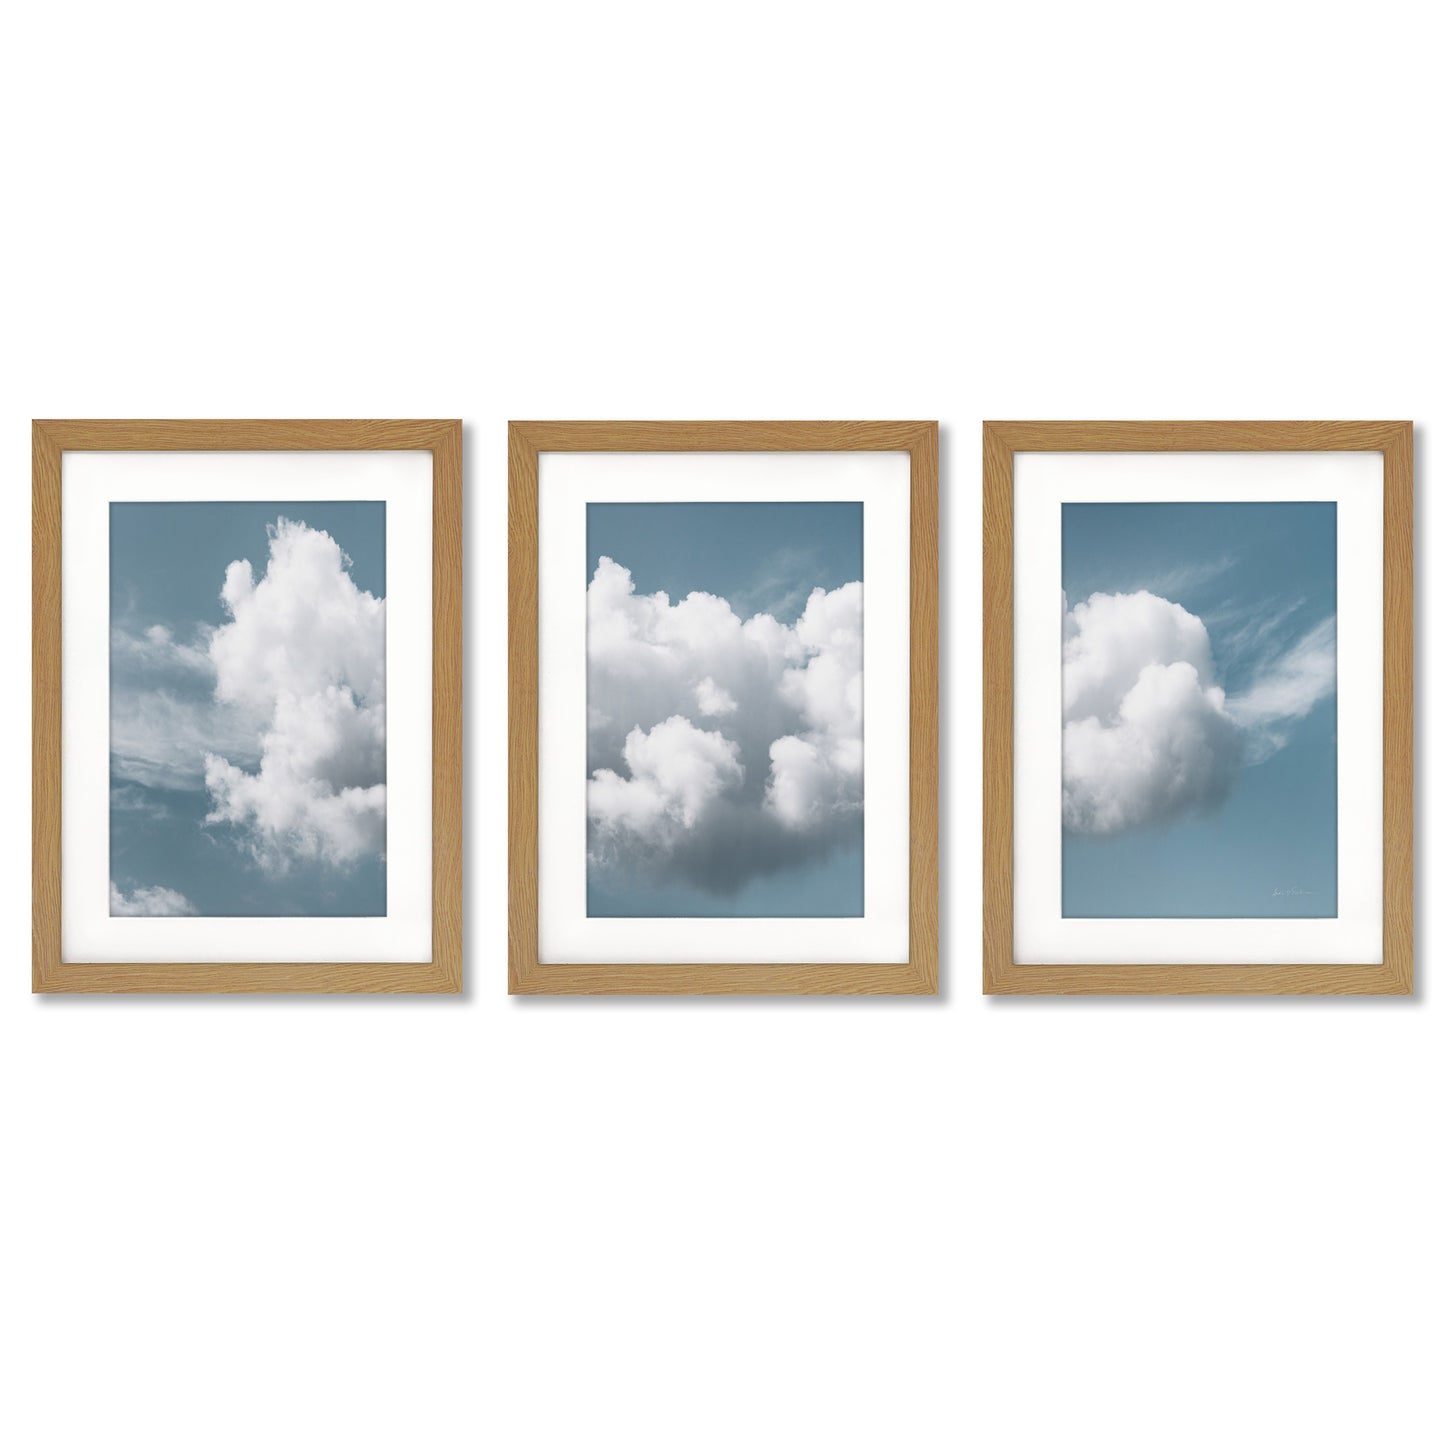 Fluffy Clouds by Mary Urban - 3 Piece Gallery Framed Print with Mat Art Set